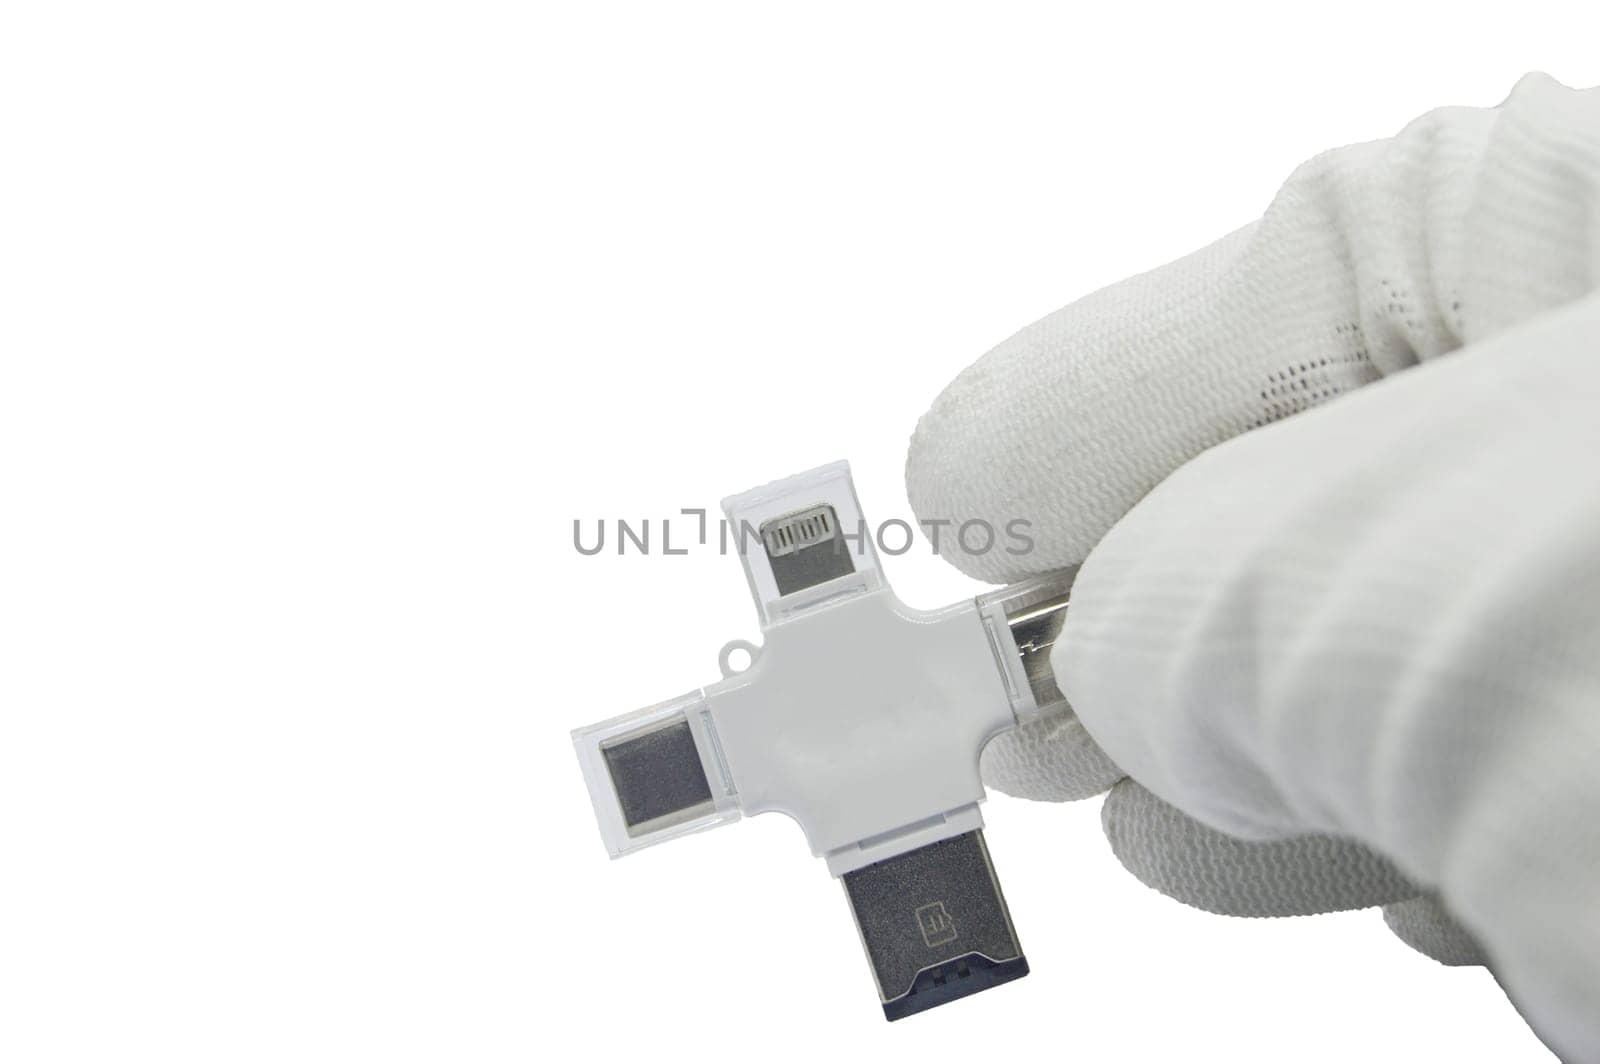 USB card reader white cross shape (with clipping path)